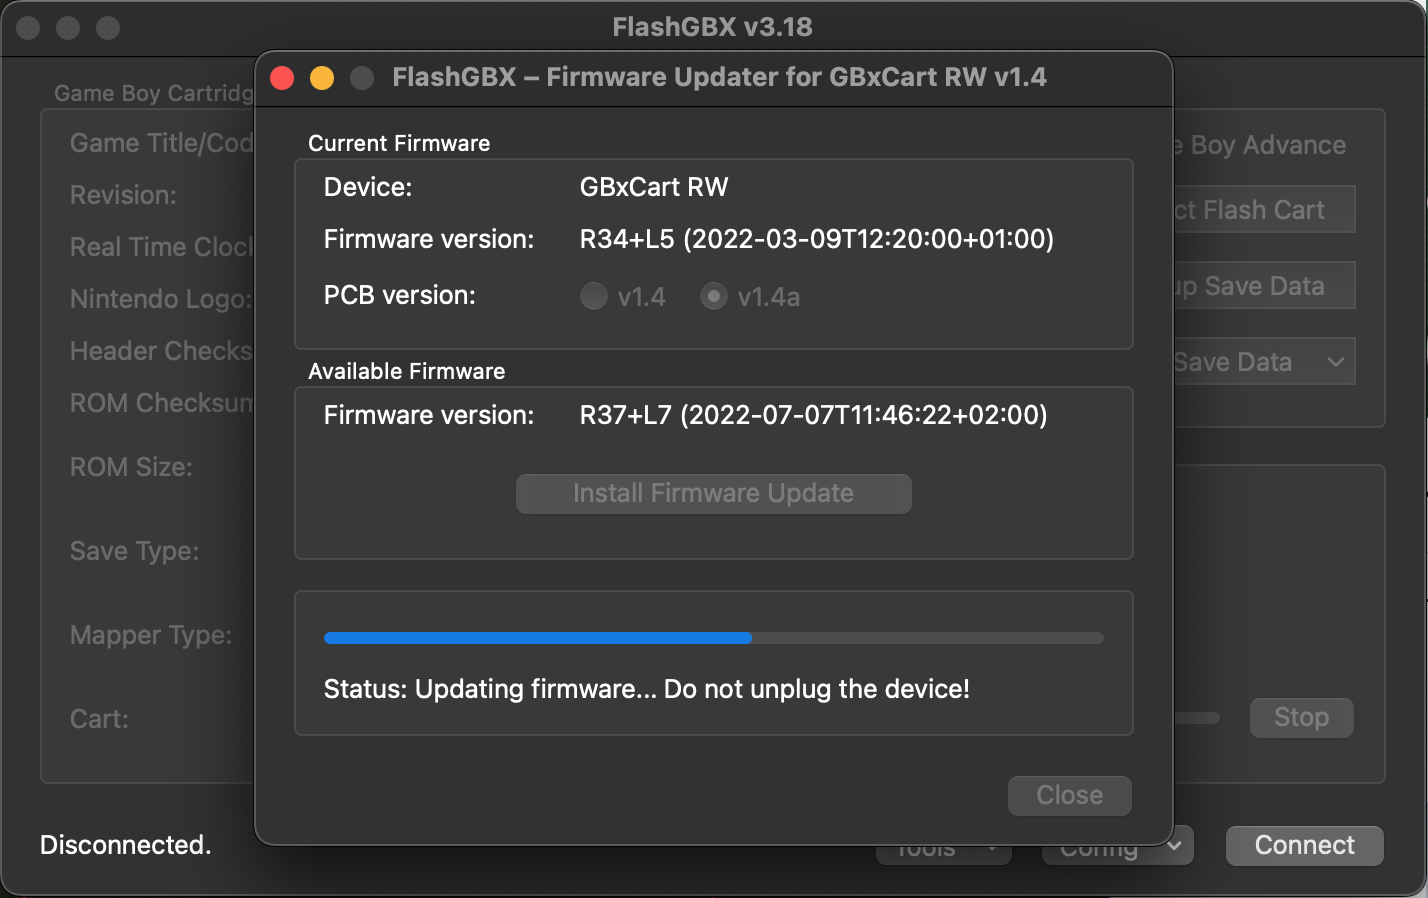 The software presents a firmware update dialog